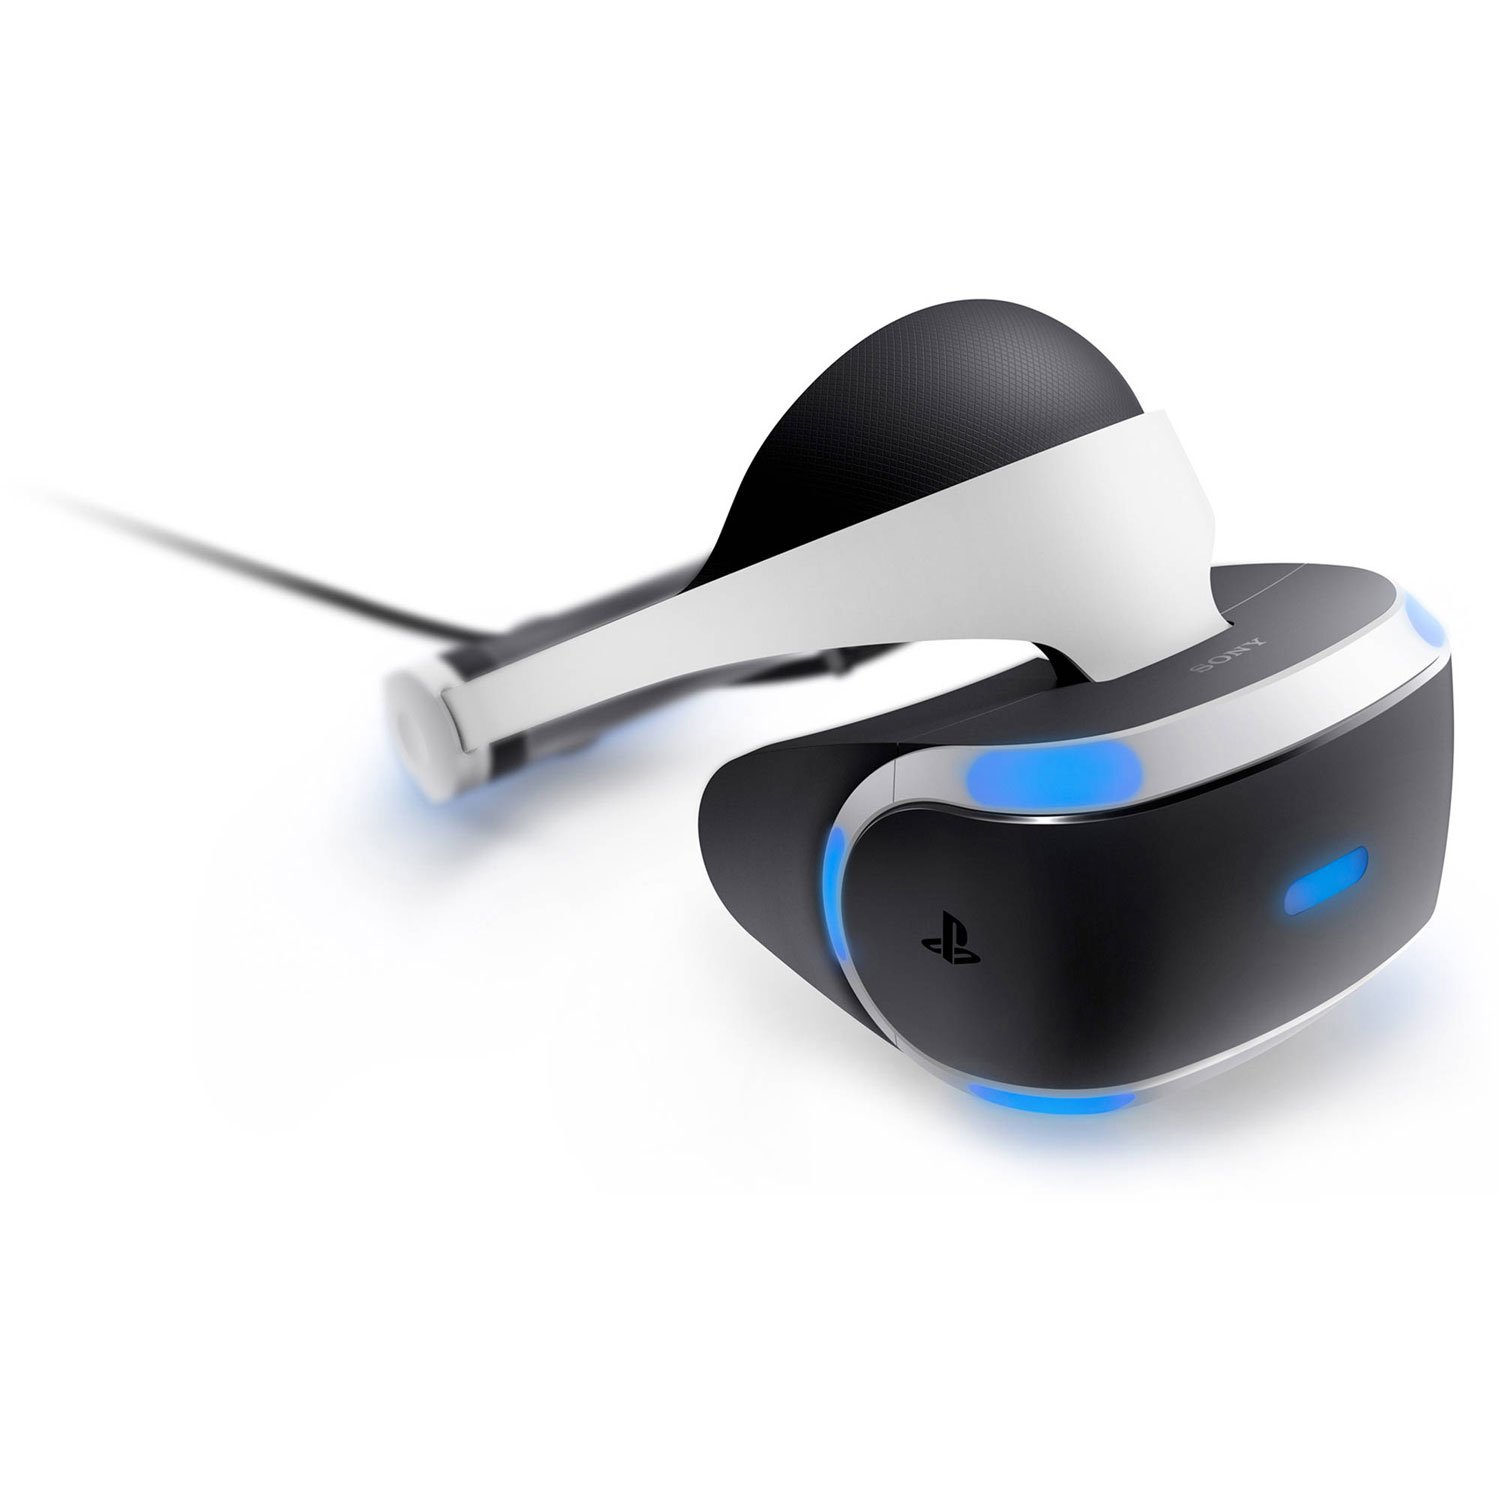 How Much Are The Playstation Vr